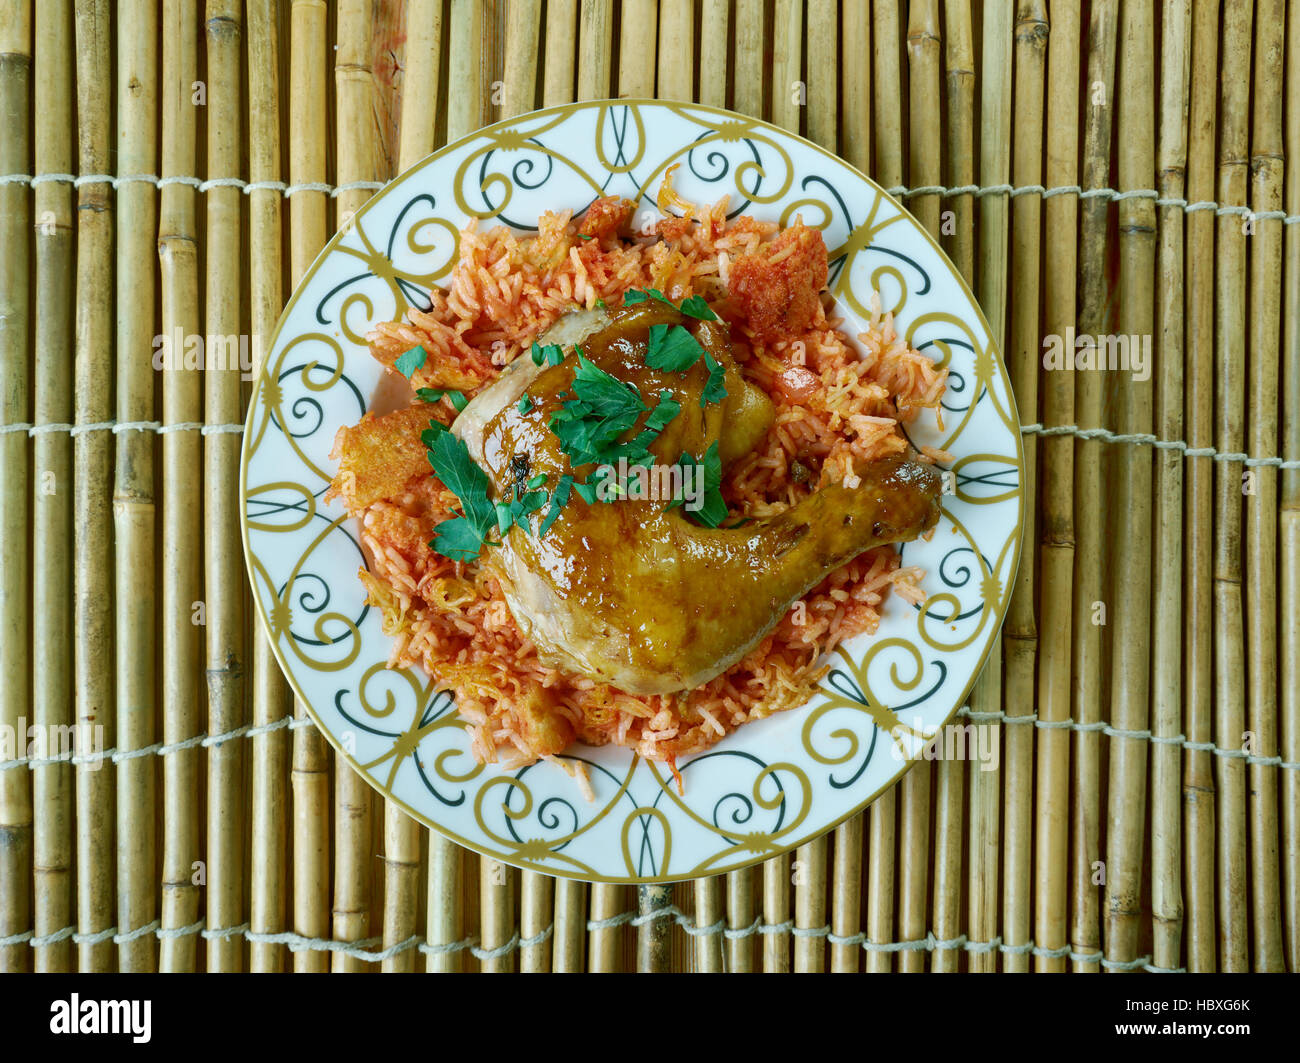 Egyptian Faatah Rice And chicken Meat With Crispy Bread On Bottom Stock Photo